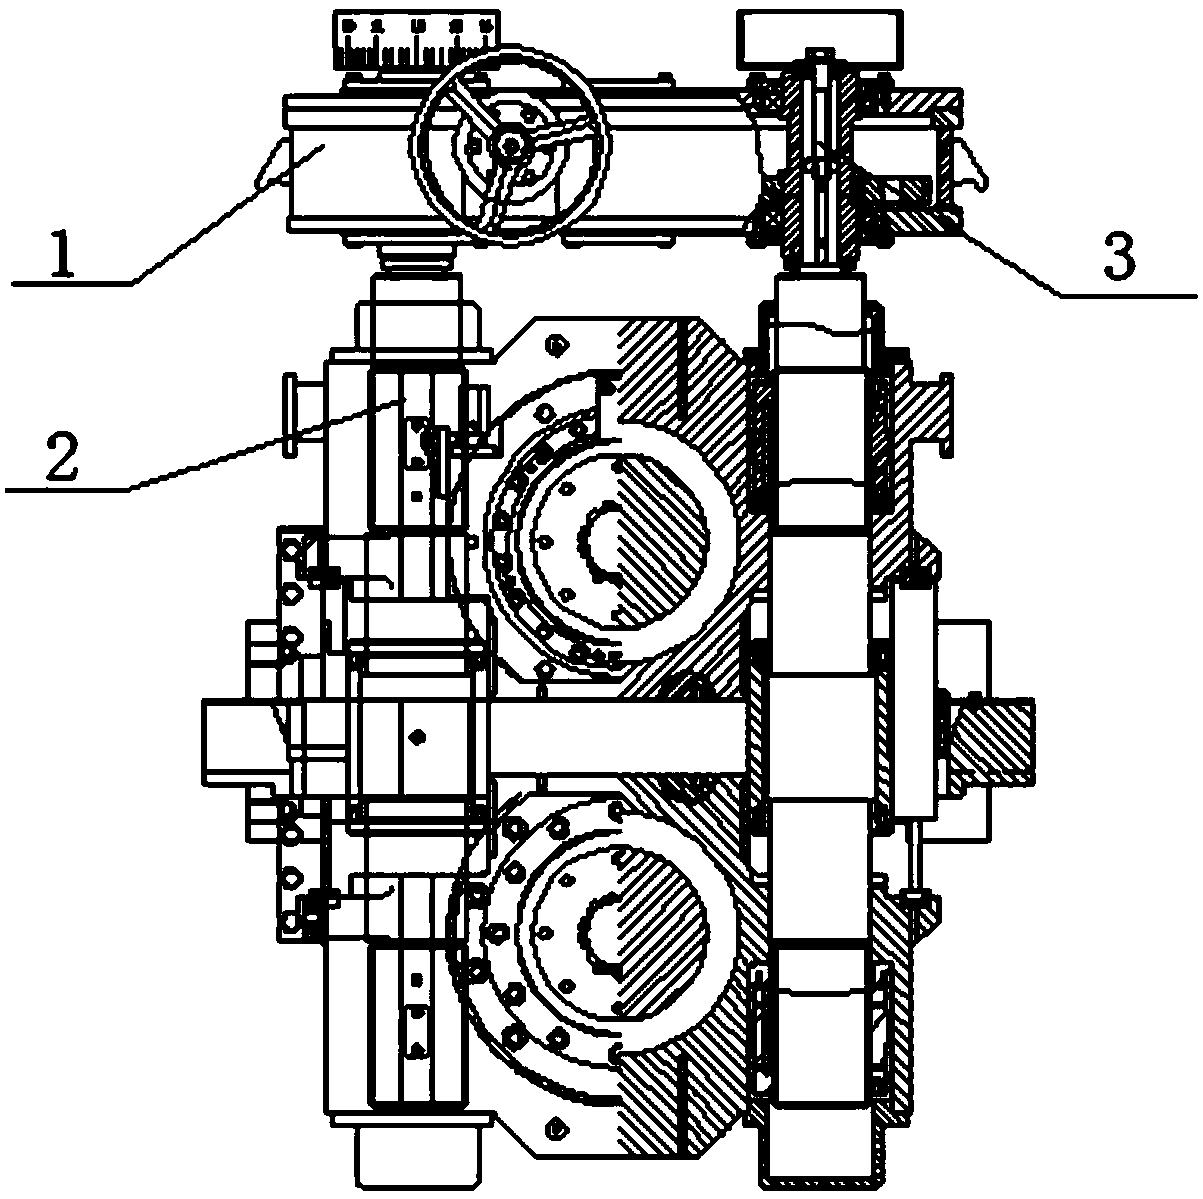 Pull rod connection structure in short-stress path rolling mill